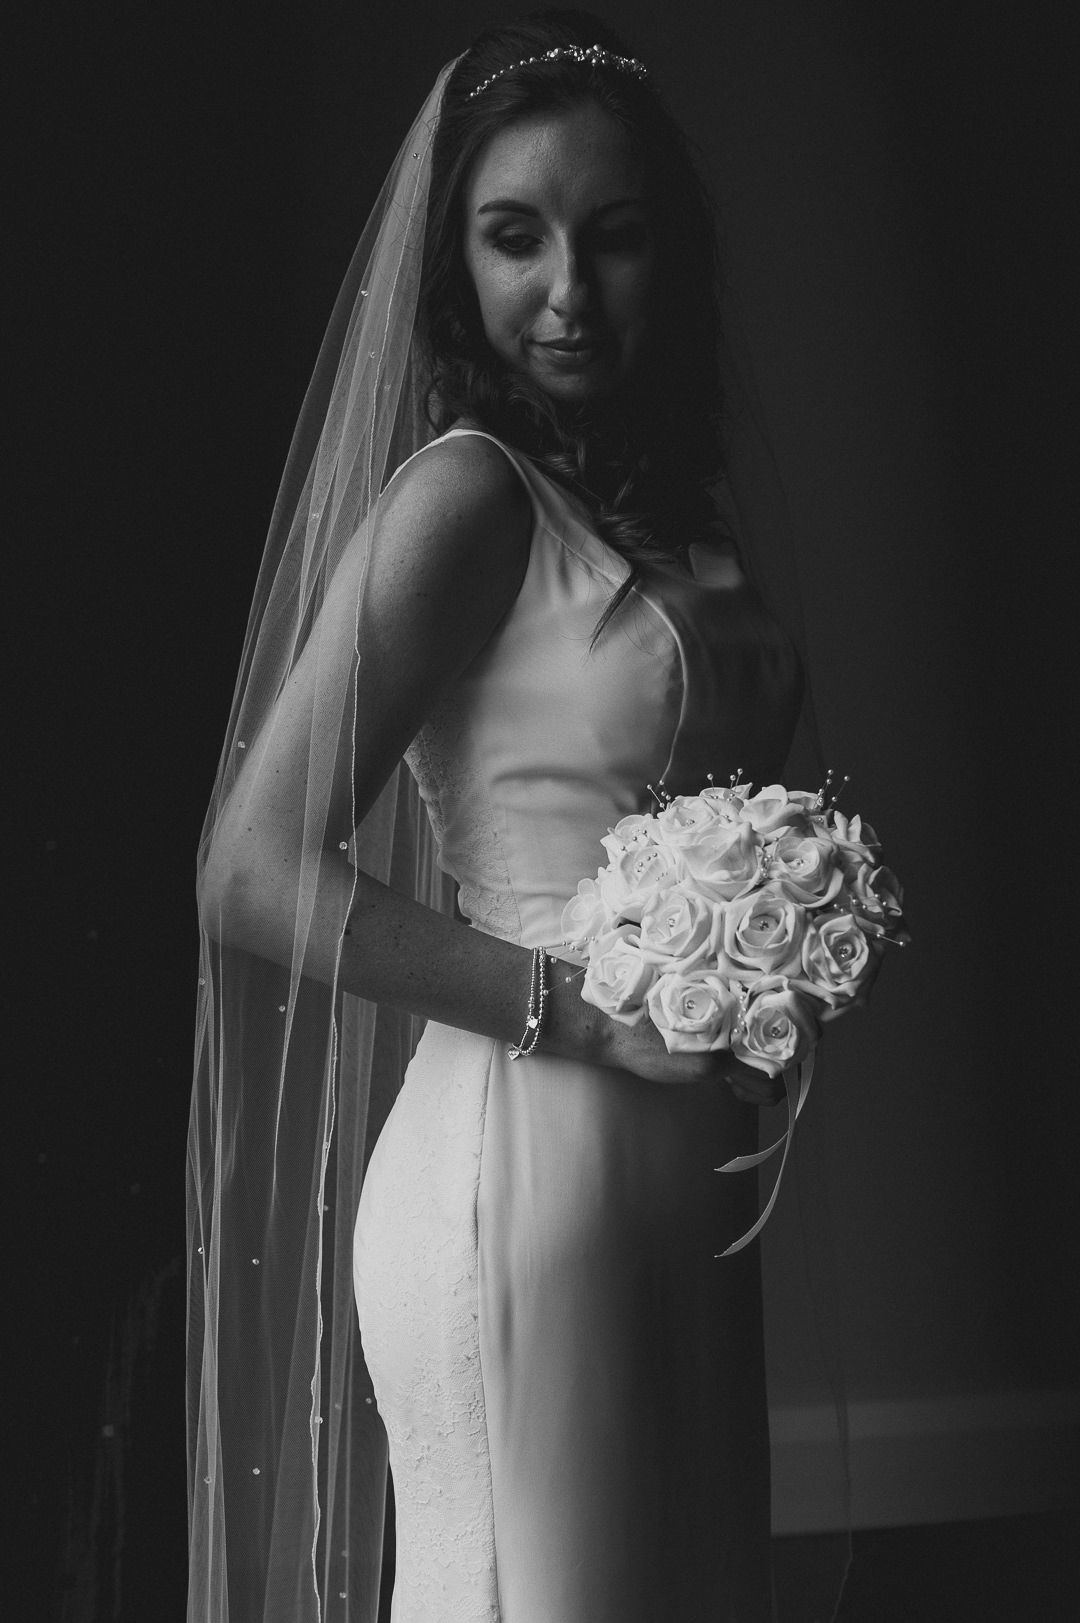 The bride stands in front of the window light and holds her flowers